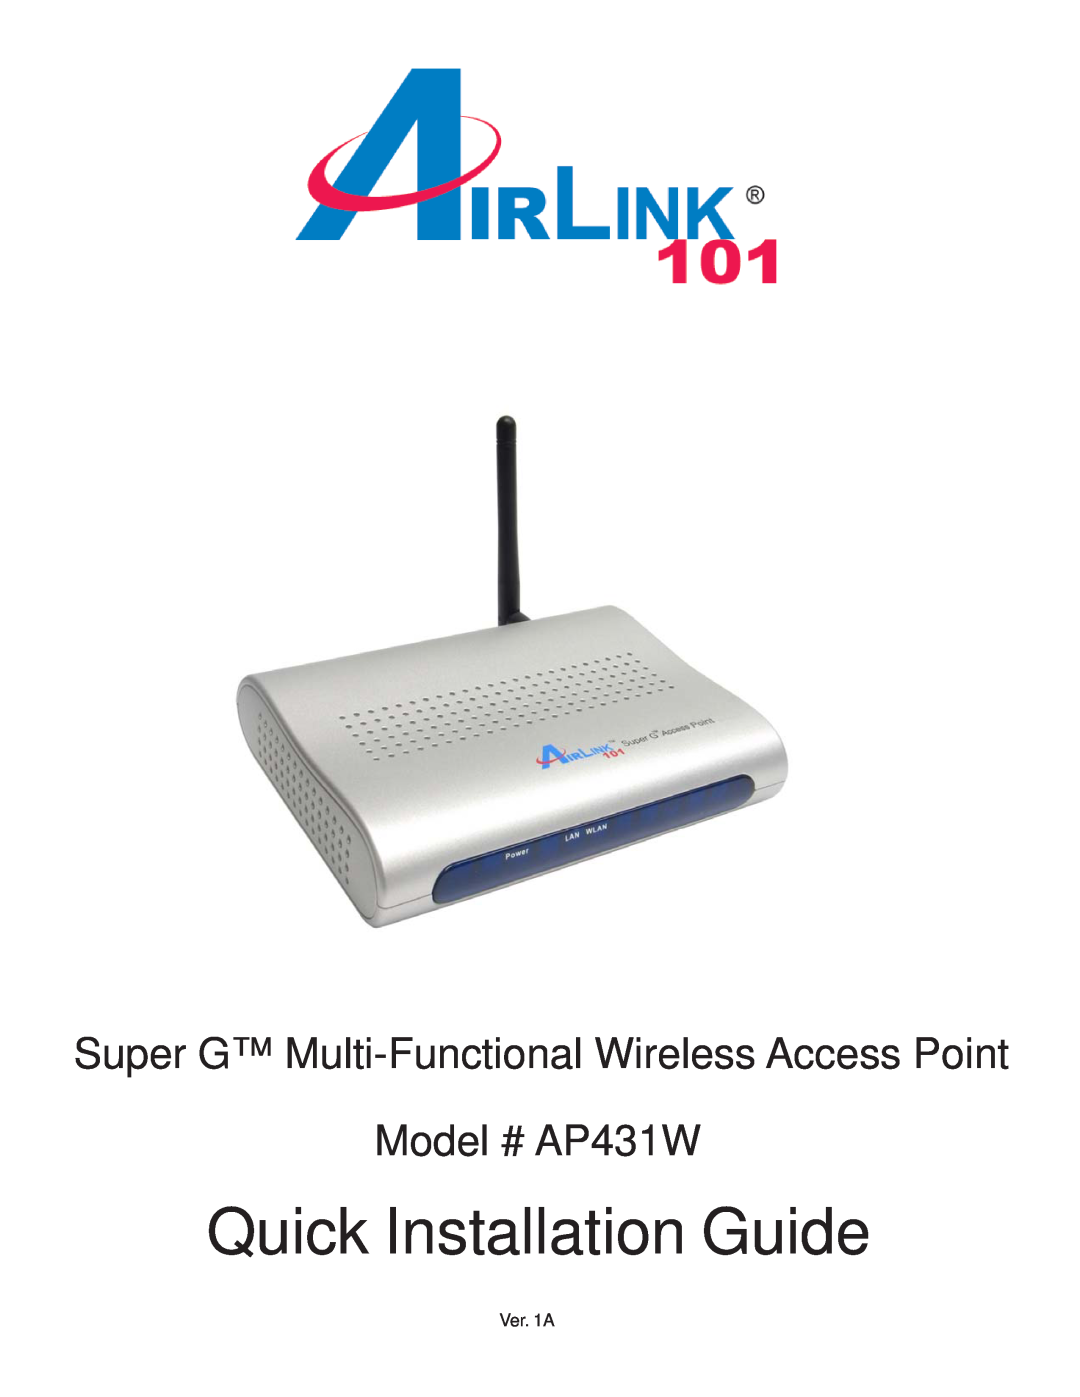 Airlink manual Quick Installation Guide, Super G Multi-Functional Wireless Access Point, Model # AP431W, Ver. 1A 